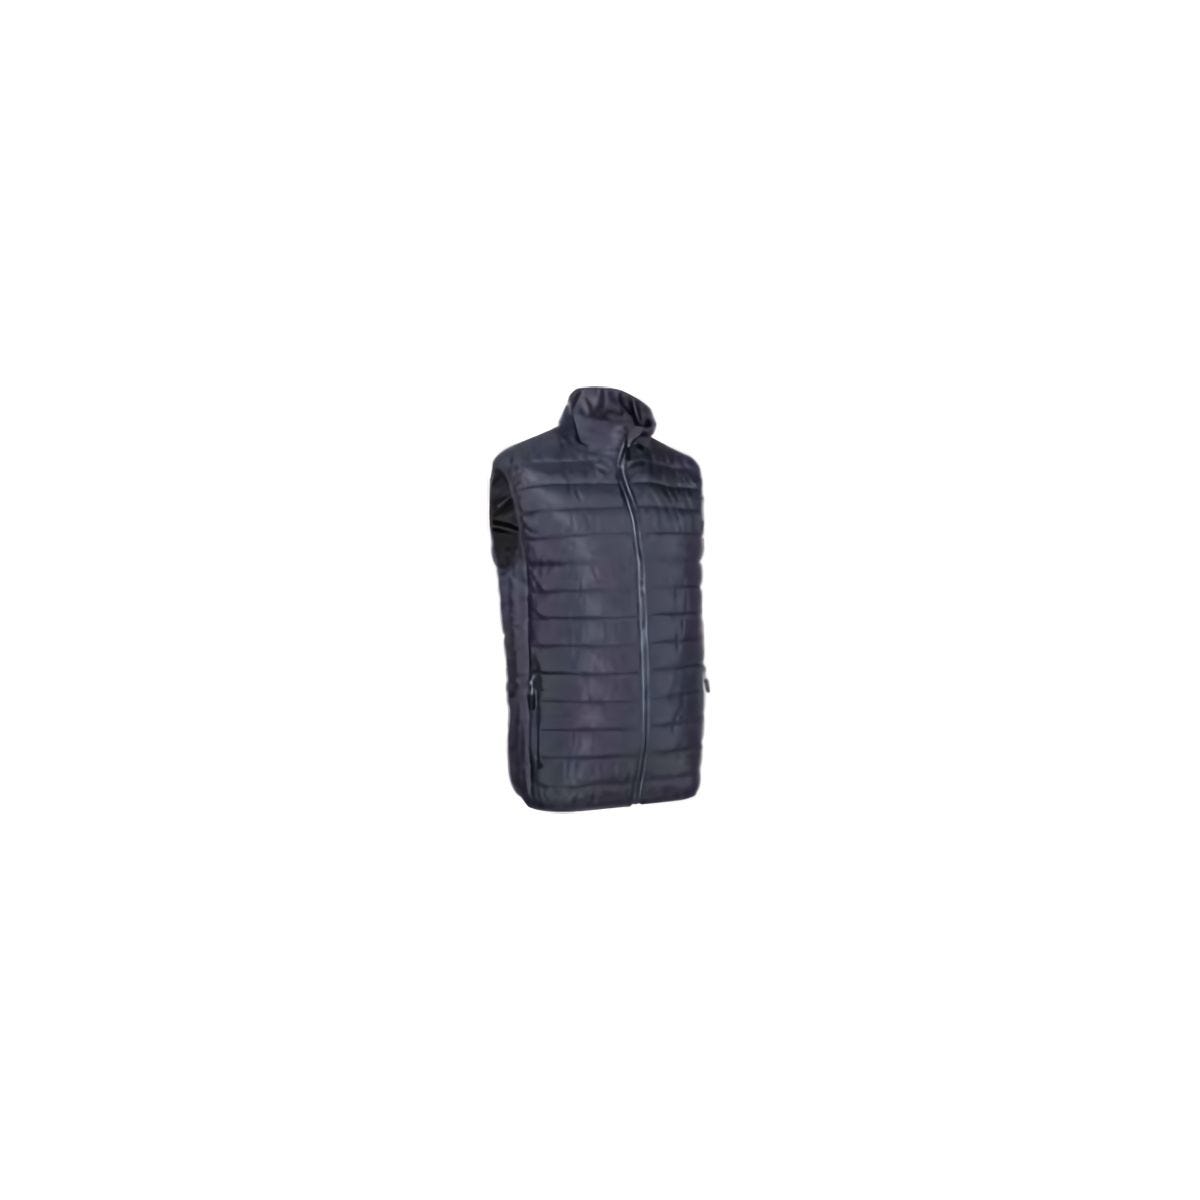 Gilet Kaba gris - Coverguard - Taille M 0